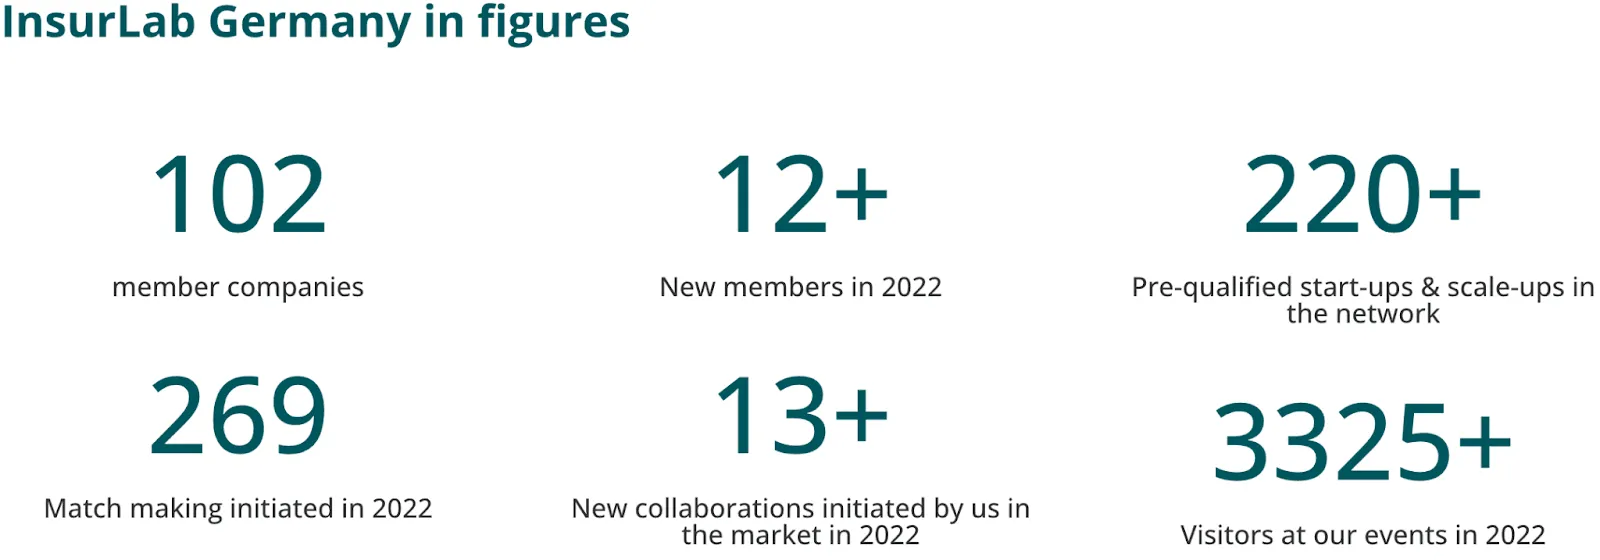 InsurLab Germany in figures: 102 member companies. 12+ new members in 2022. 220+ Pre-qualified start-ups &#x26; scale-ups in the network. 269 Match making initiated in 2022. 13+ New collaborations initiated by us in the market in 2022. 3325+ Visitors at our events in 2022.